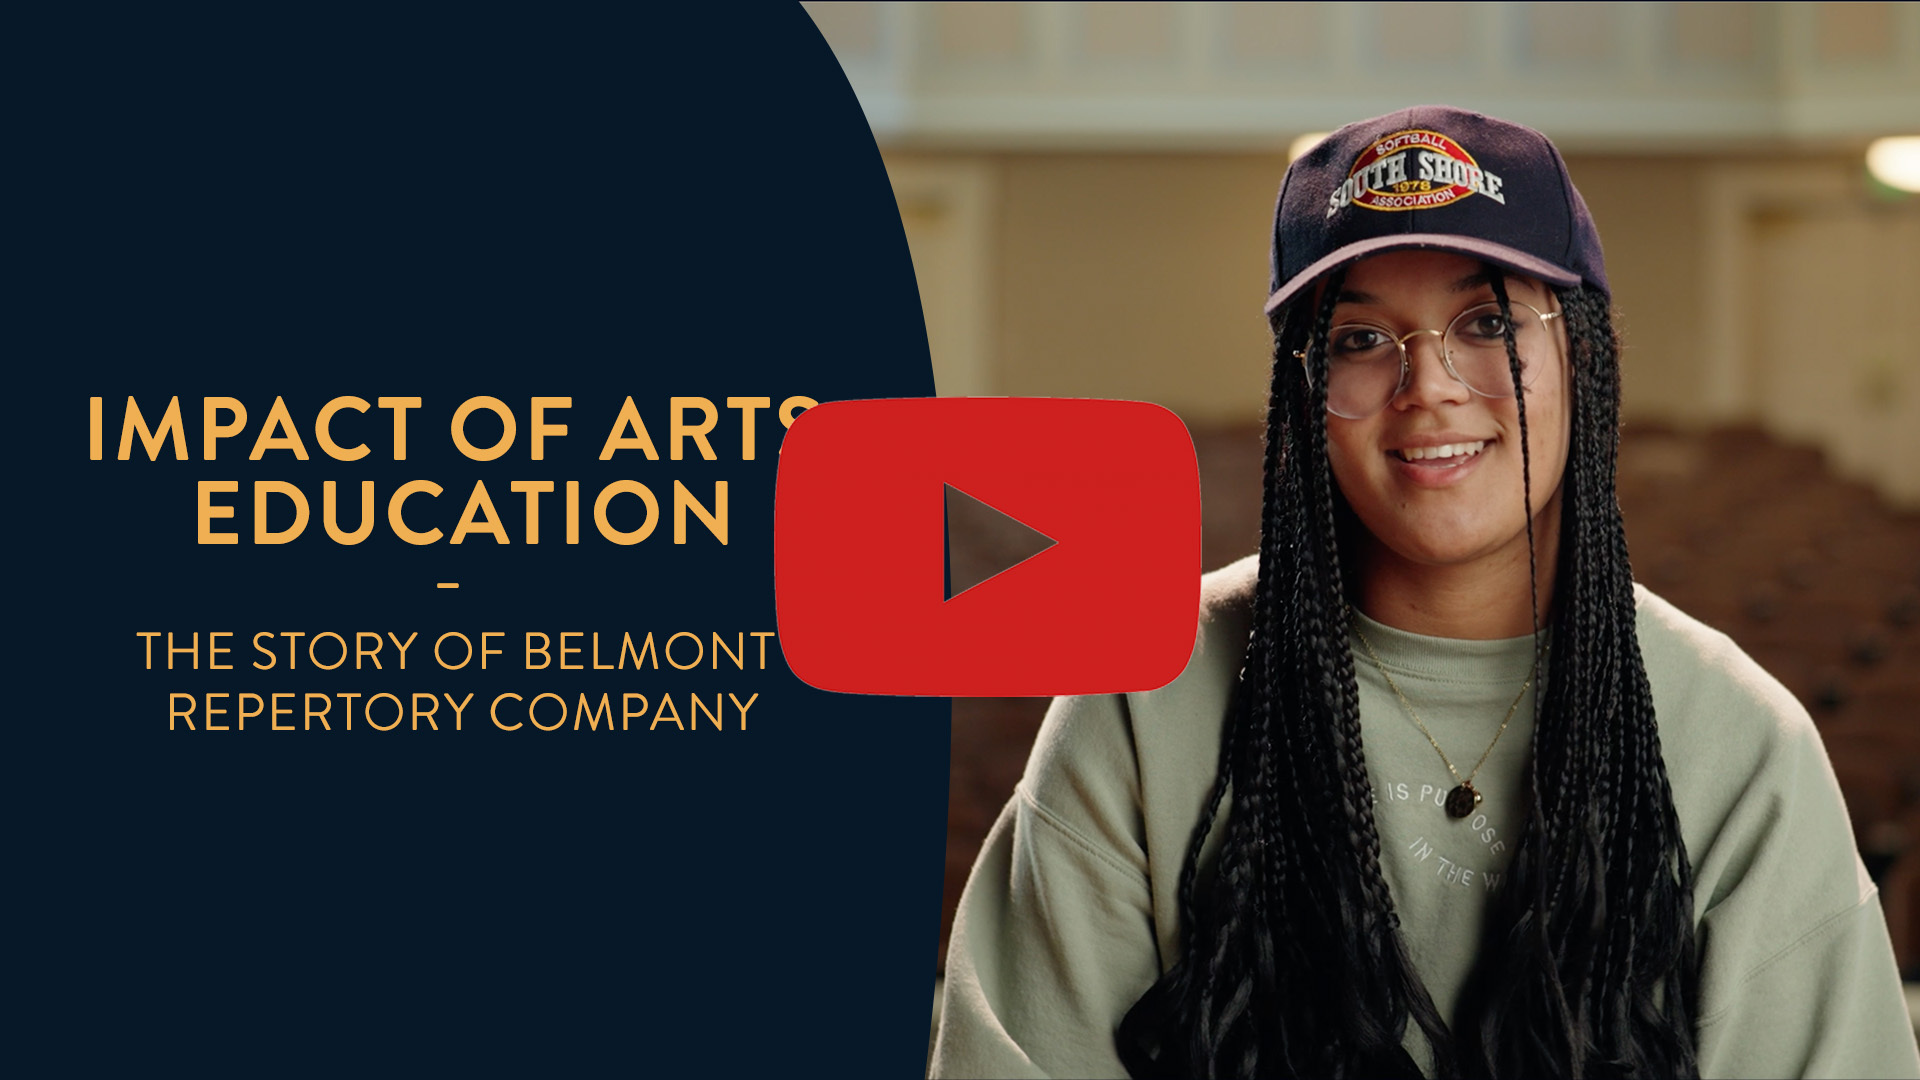 Impact of Arts Education: The story of Belmont Repertory Company